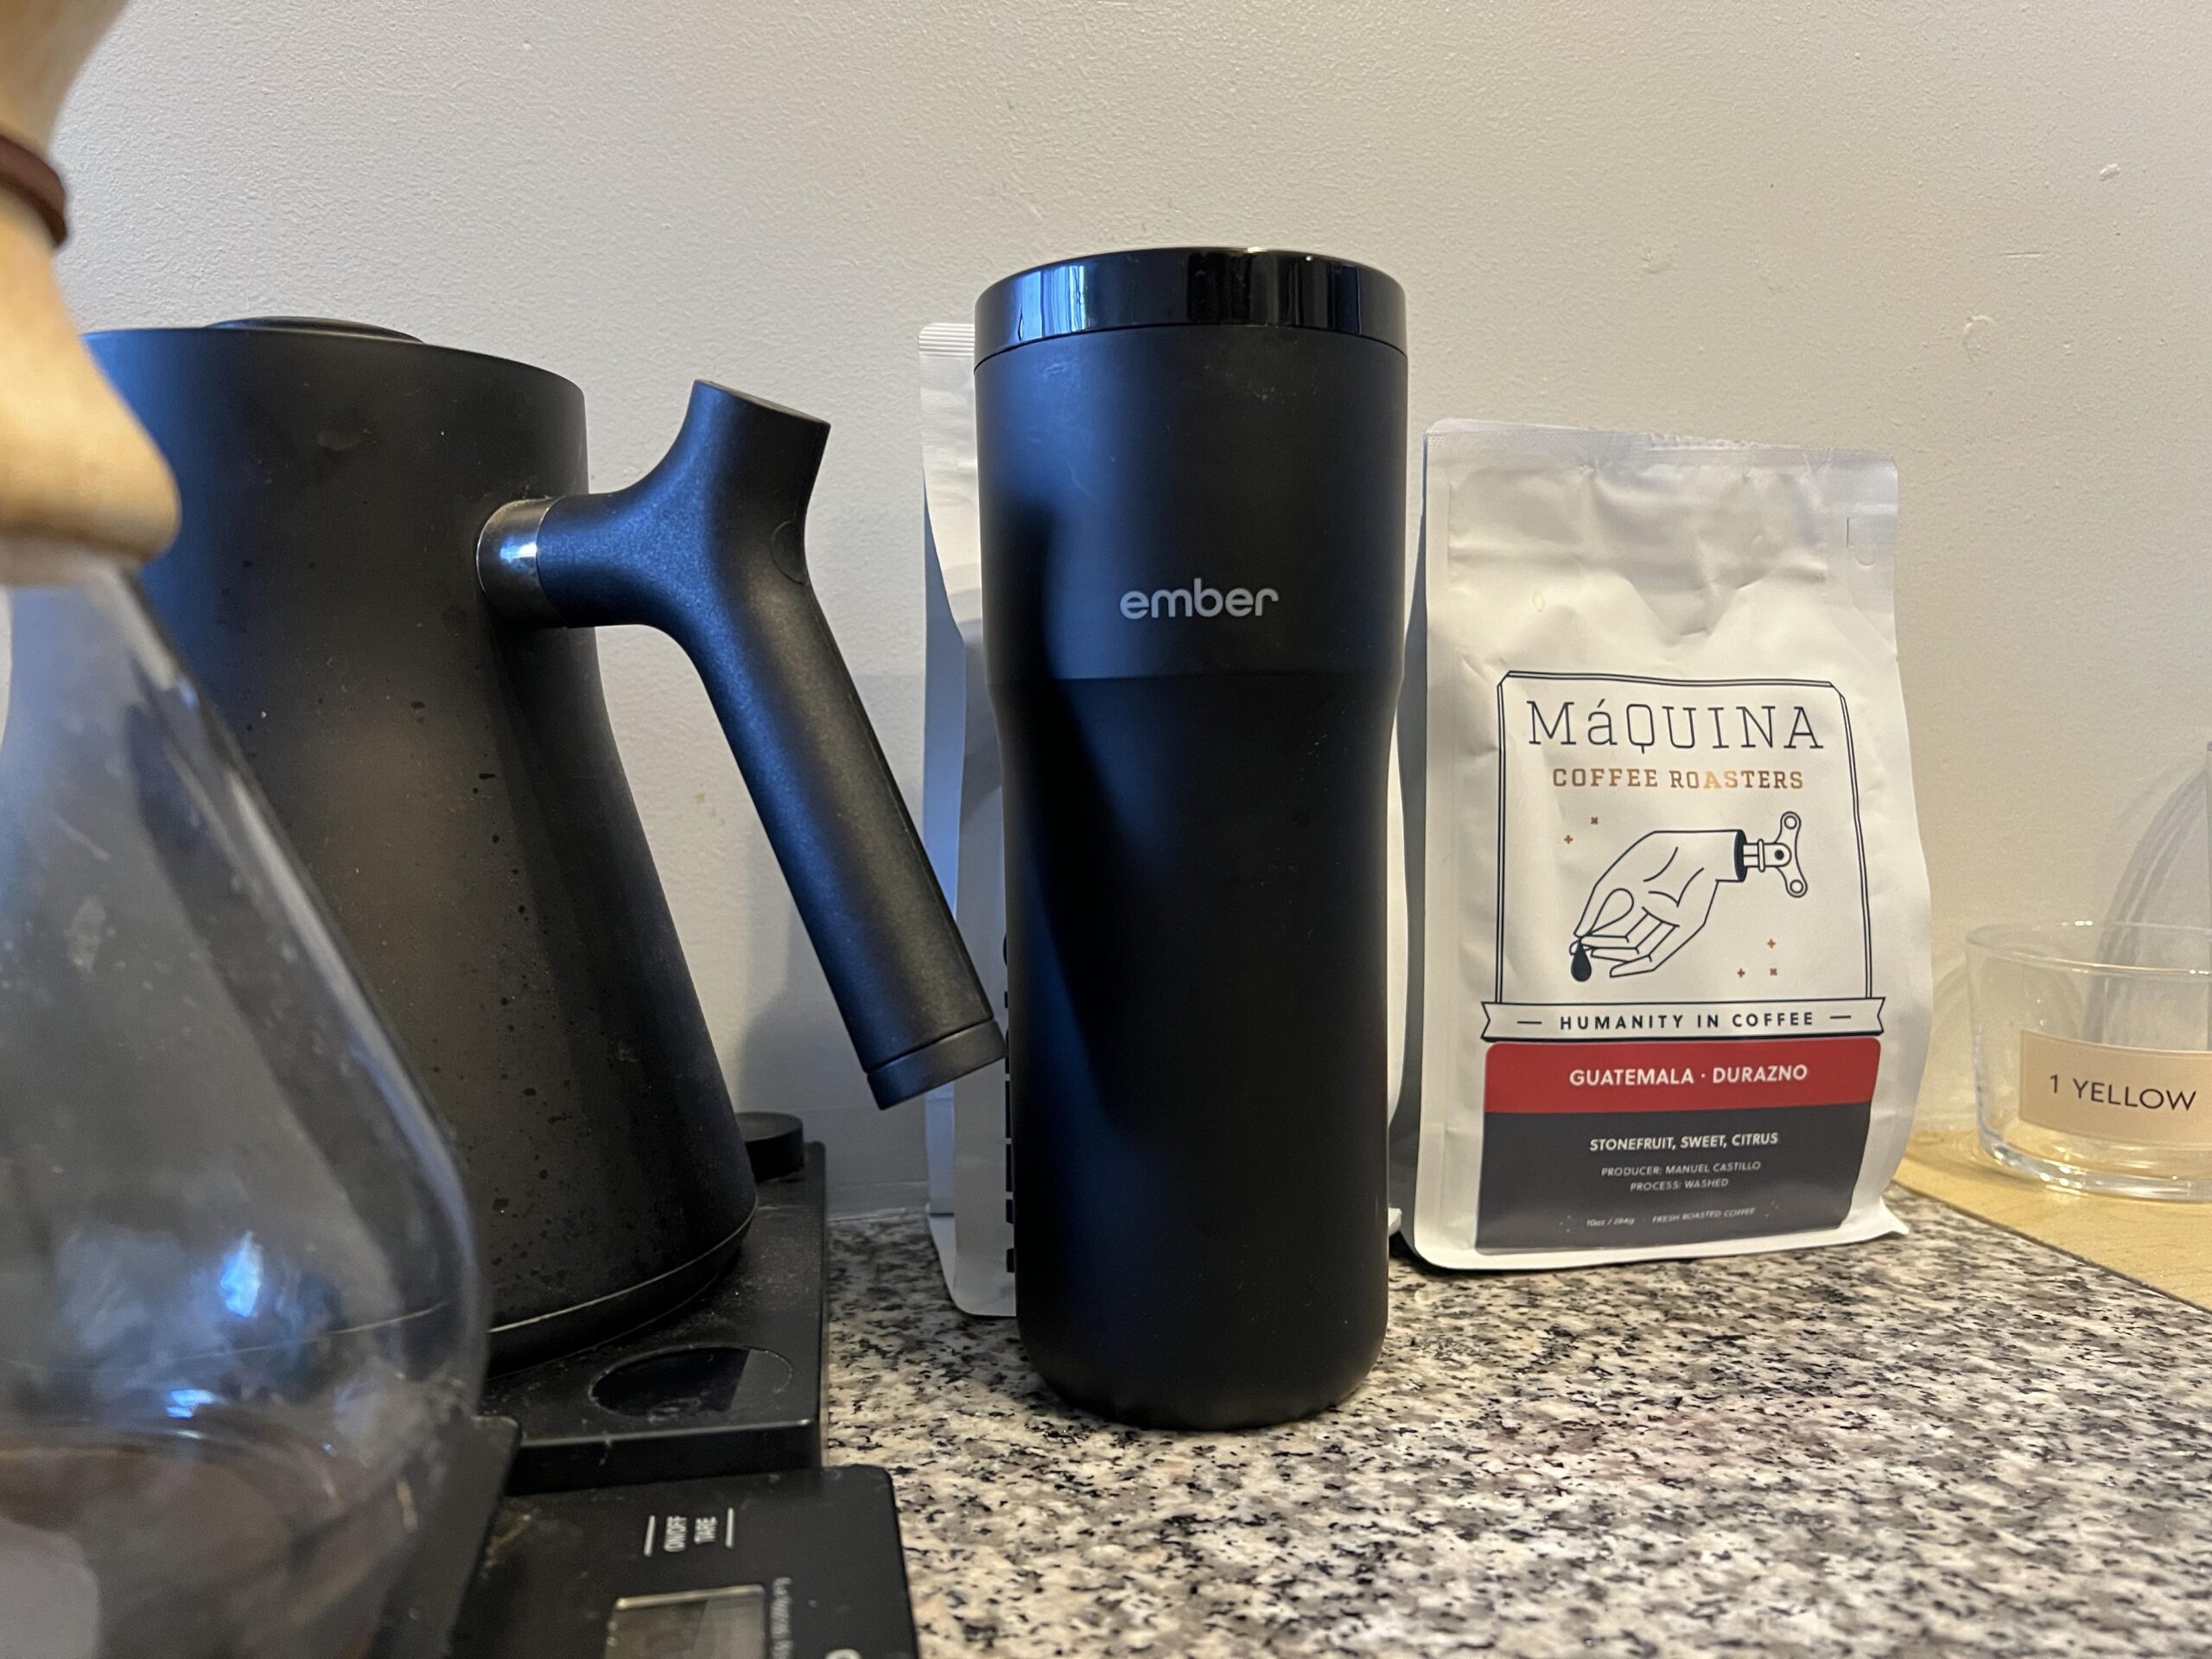 A black Ember smart mug on a marble countertop next to a bag of coffee